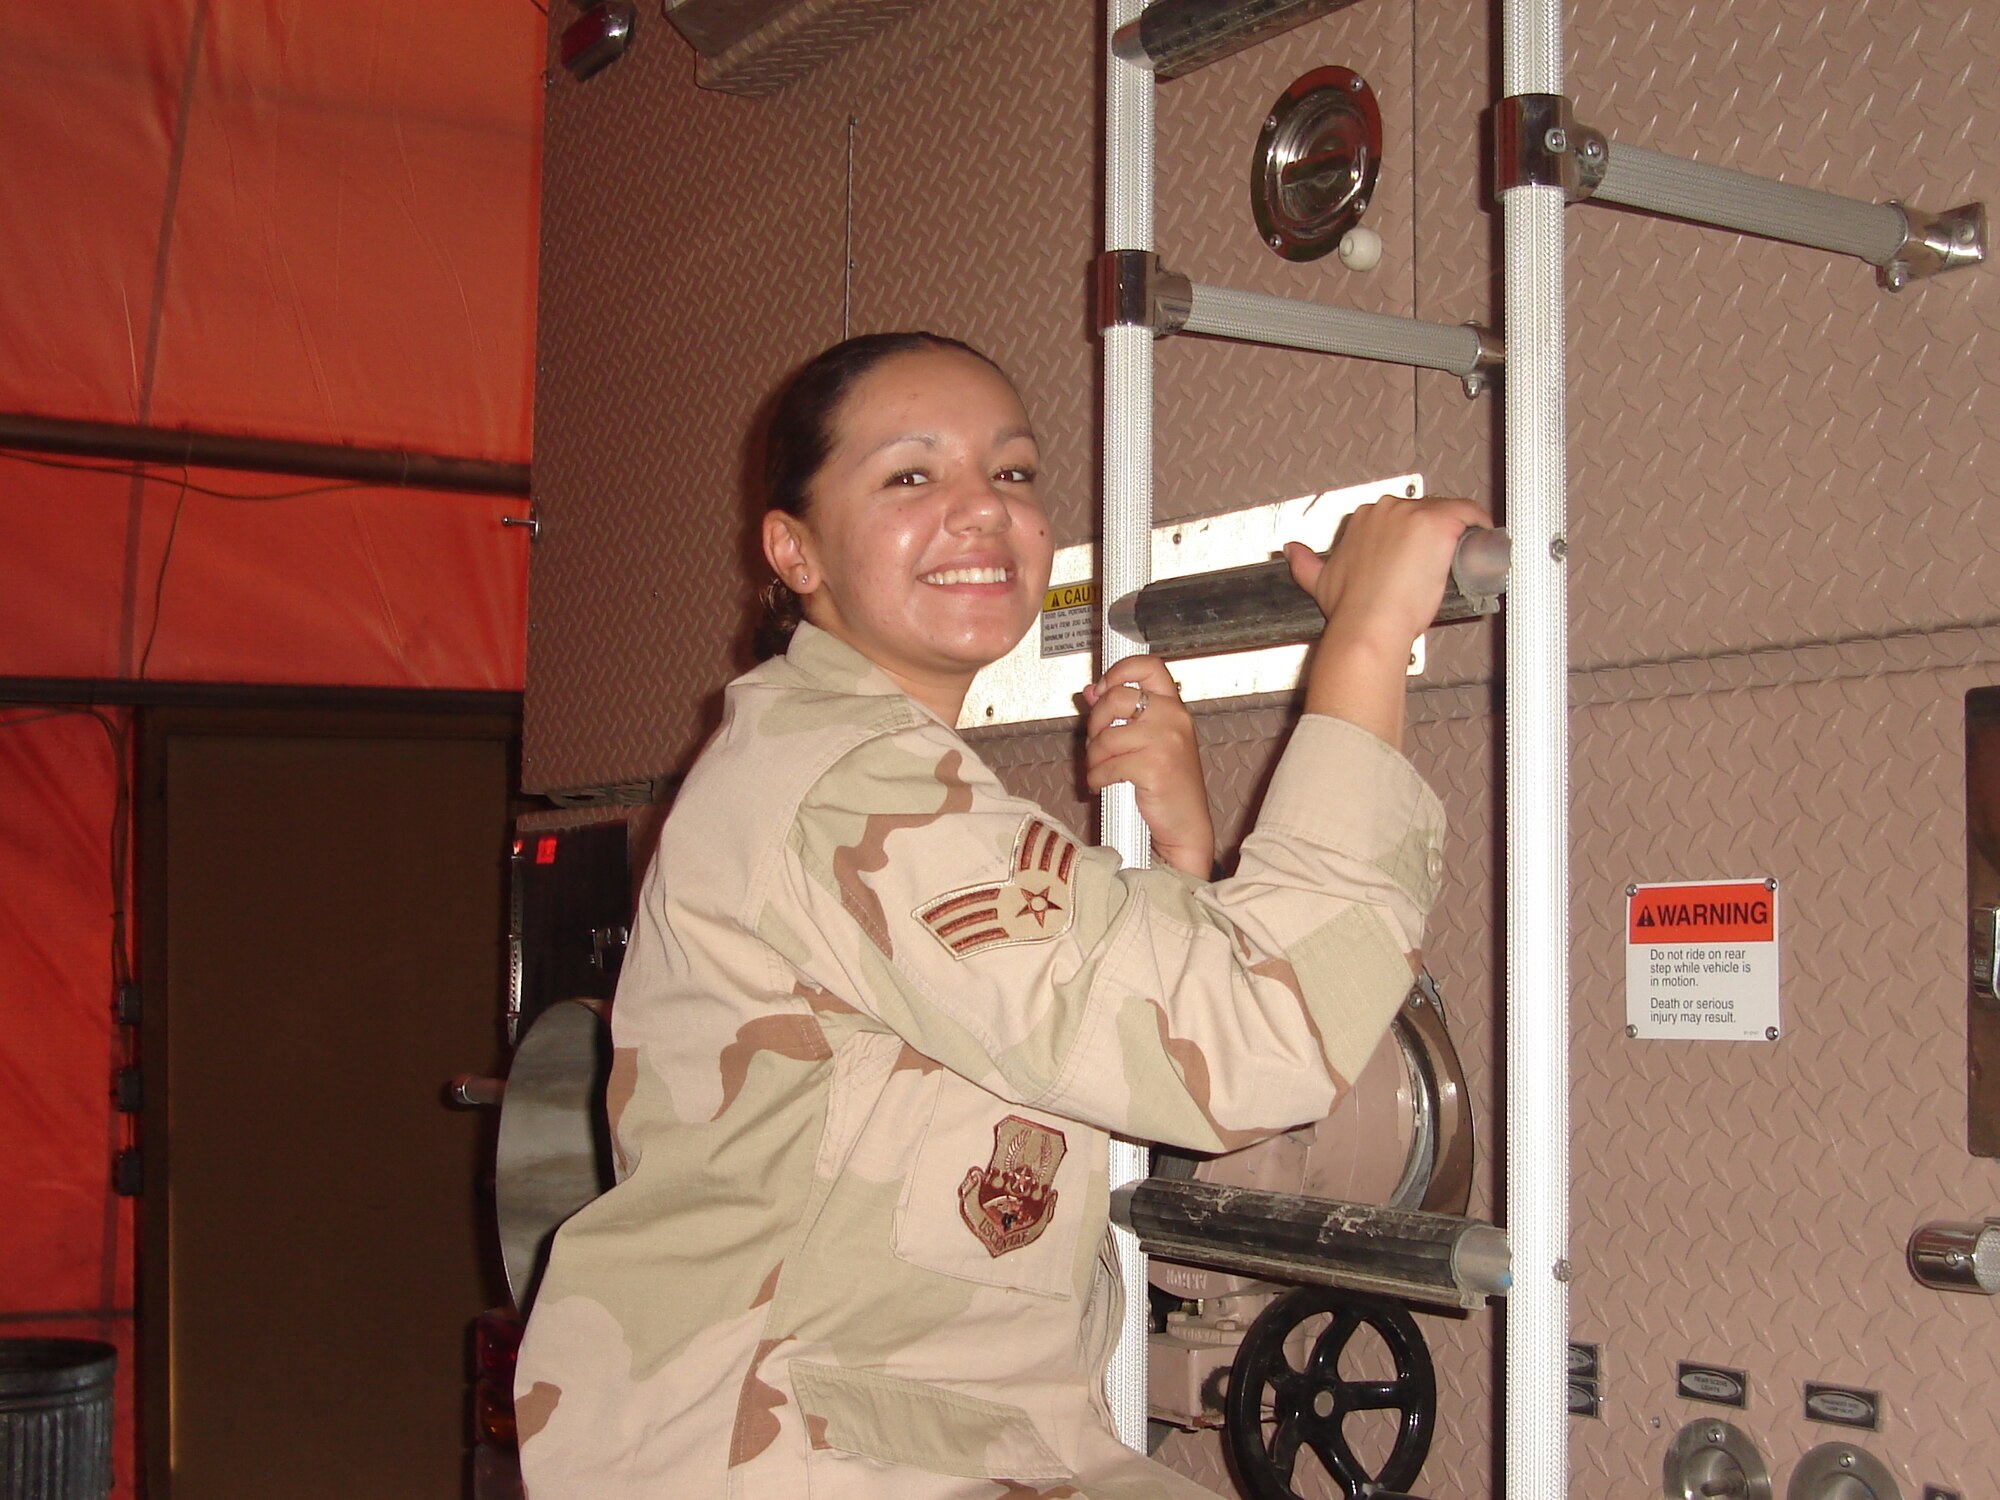 Senior Airman Denise Gutierrez of the 45th Space Wing Chapel during her deployment to Manas Air Base, Kyrgyzstan. (Courtesy photo)